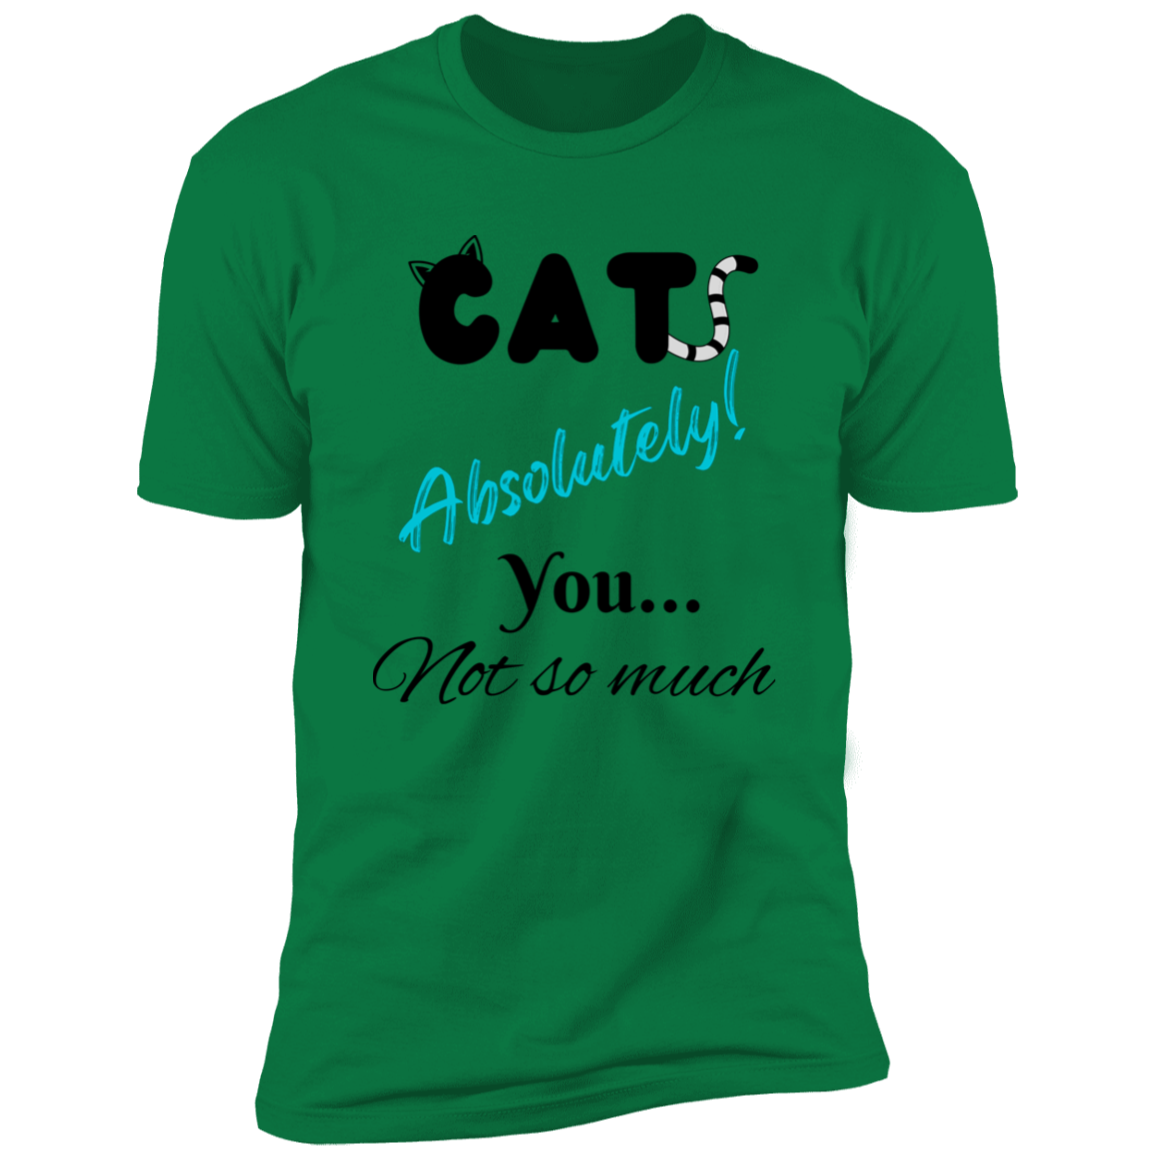 Cats Absolutely You Not So Much T-shirt, Cat Shirt for humans , in kelly green